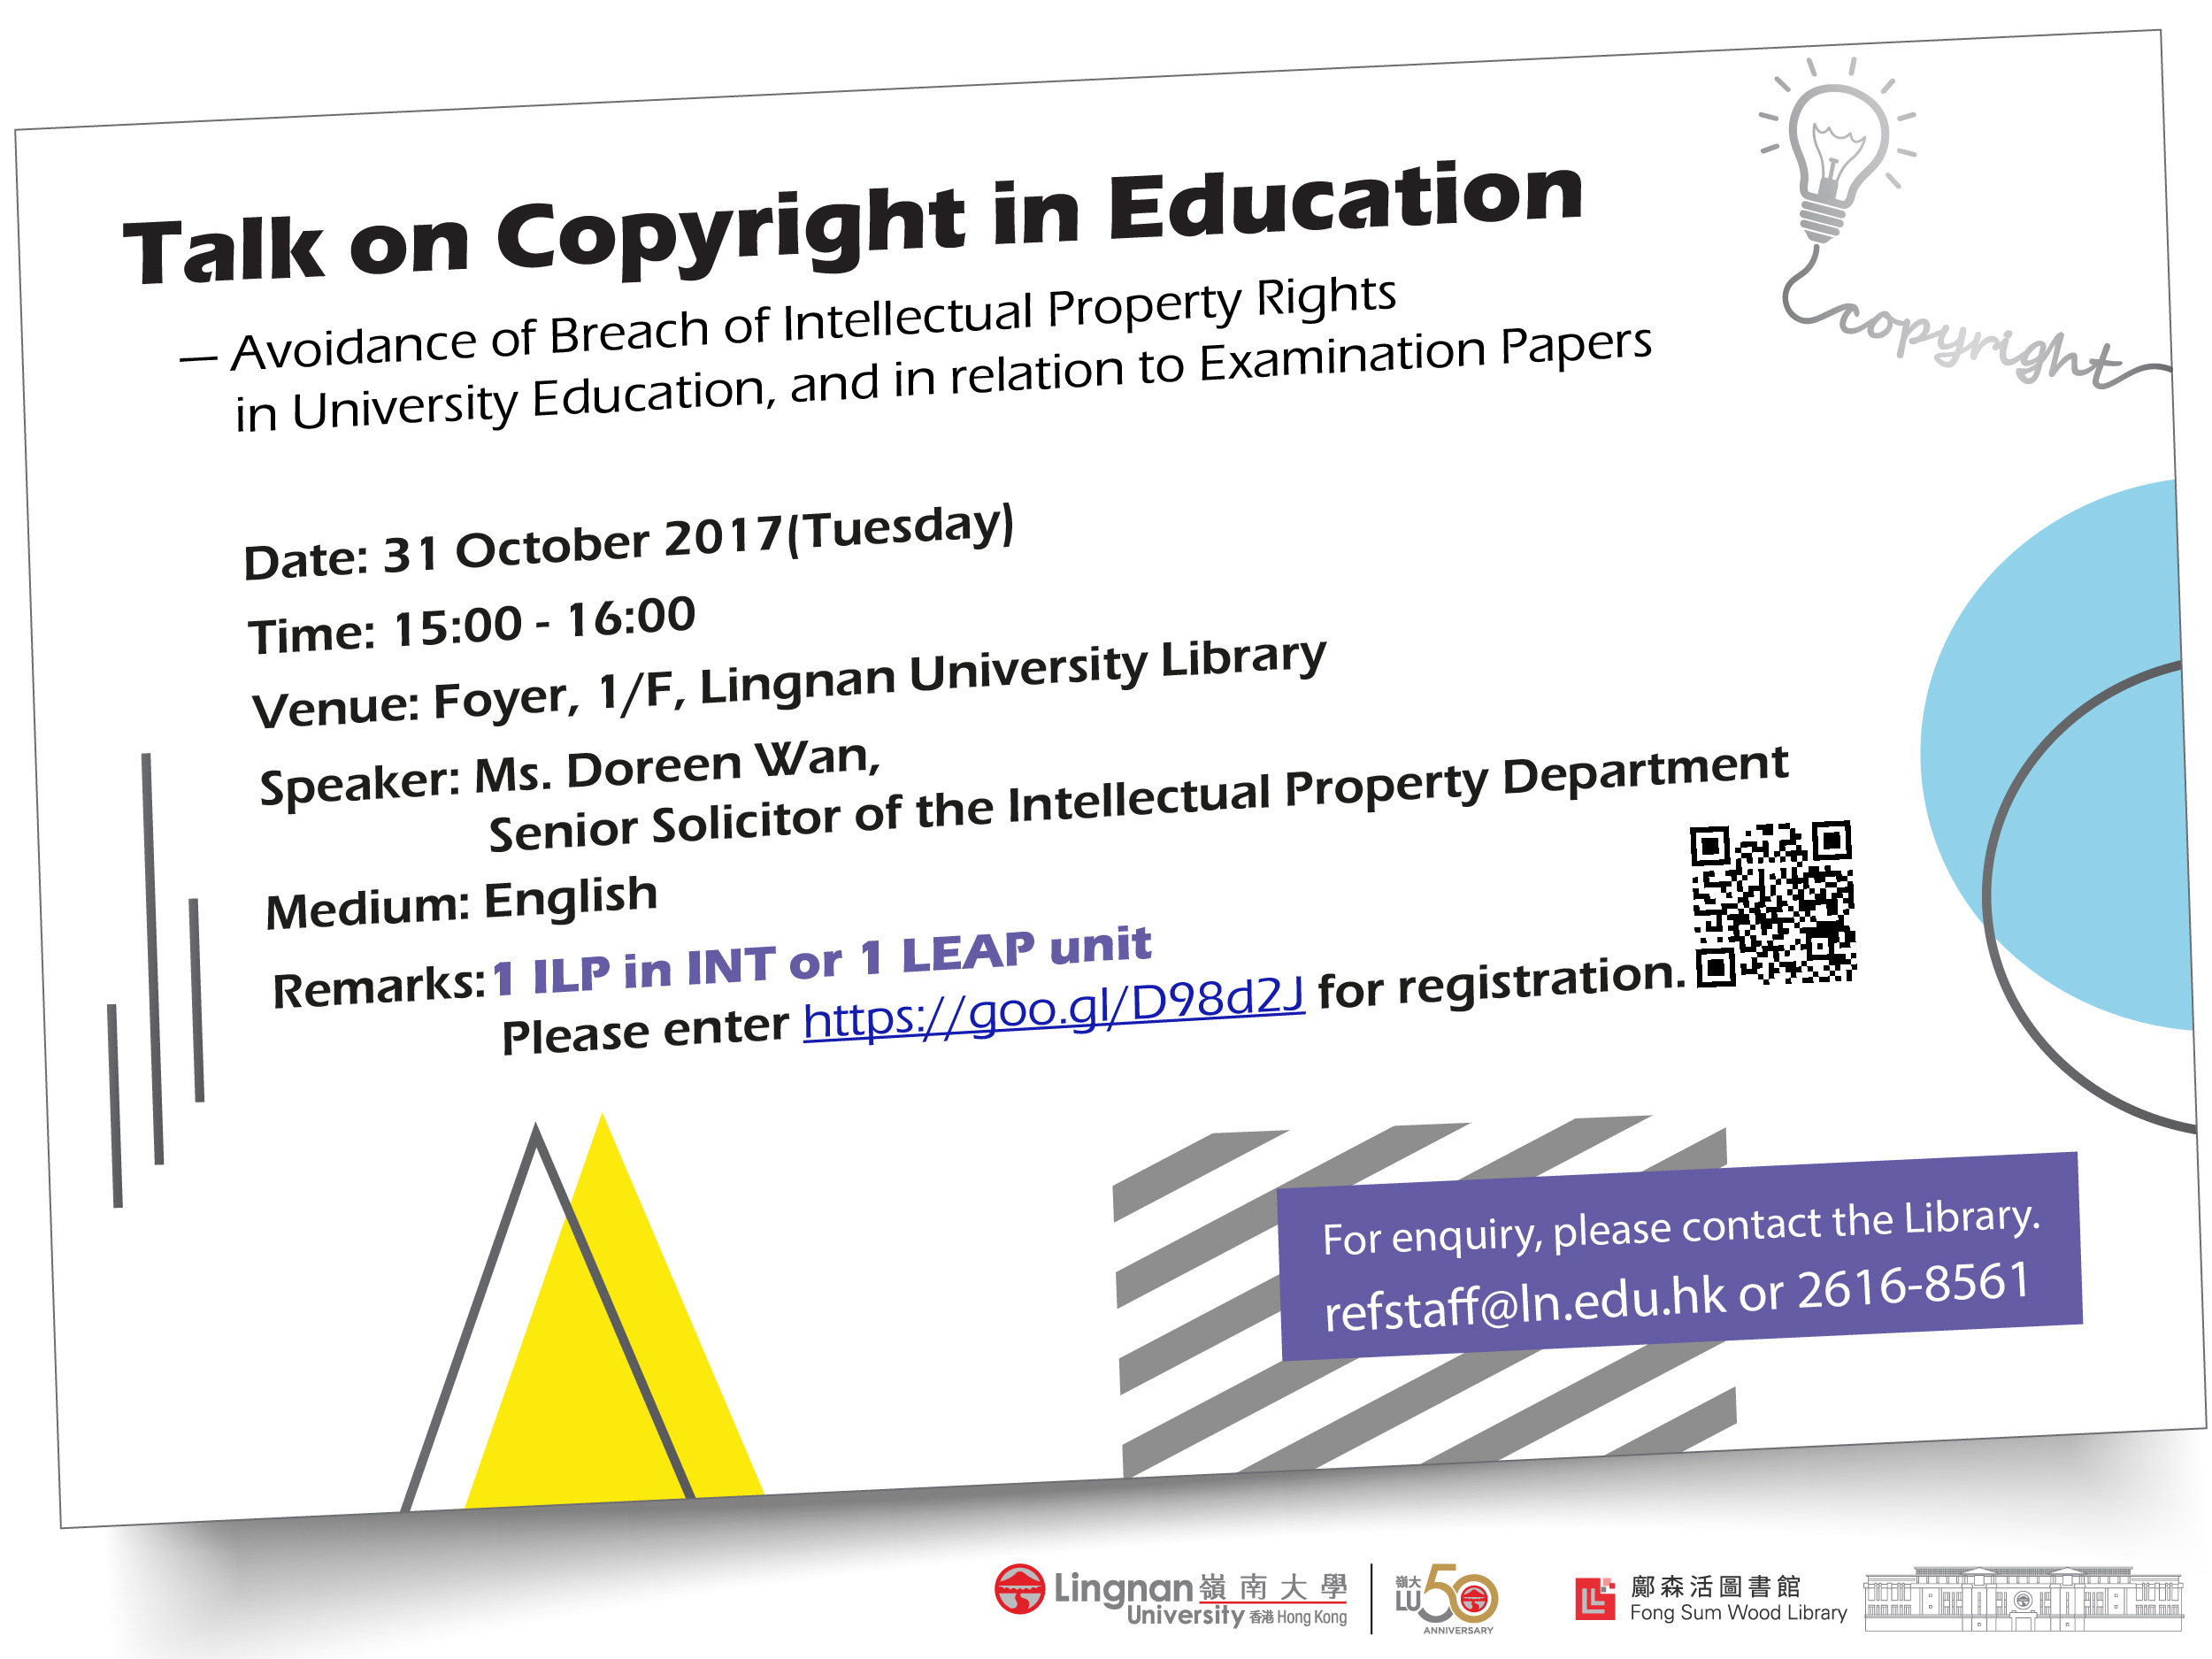 Talk on Copyright and Education